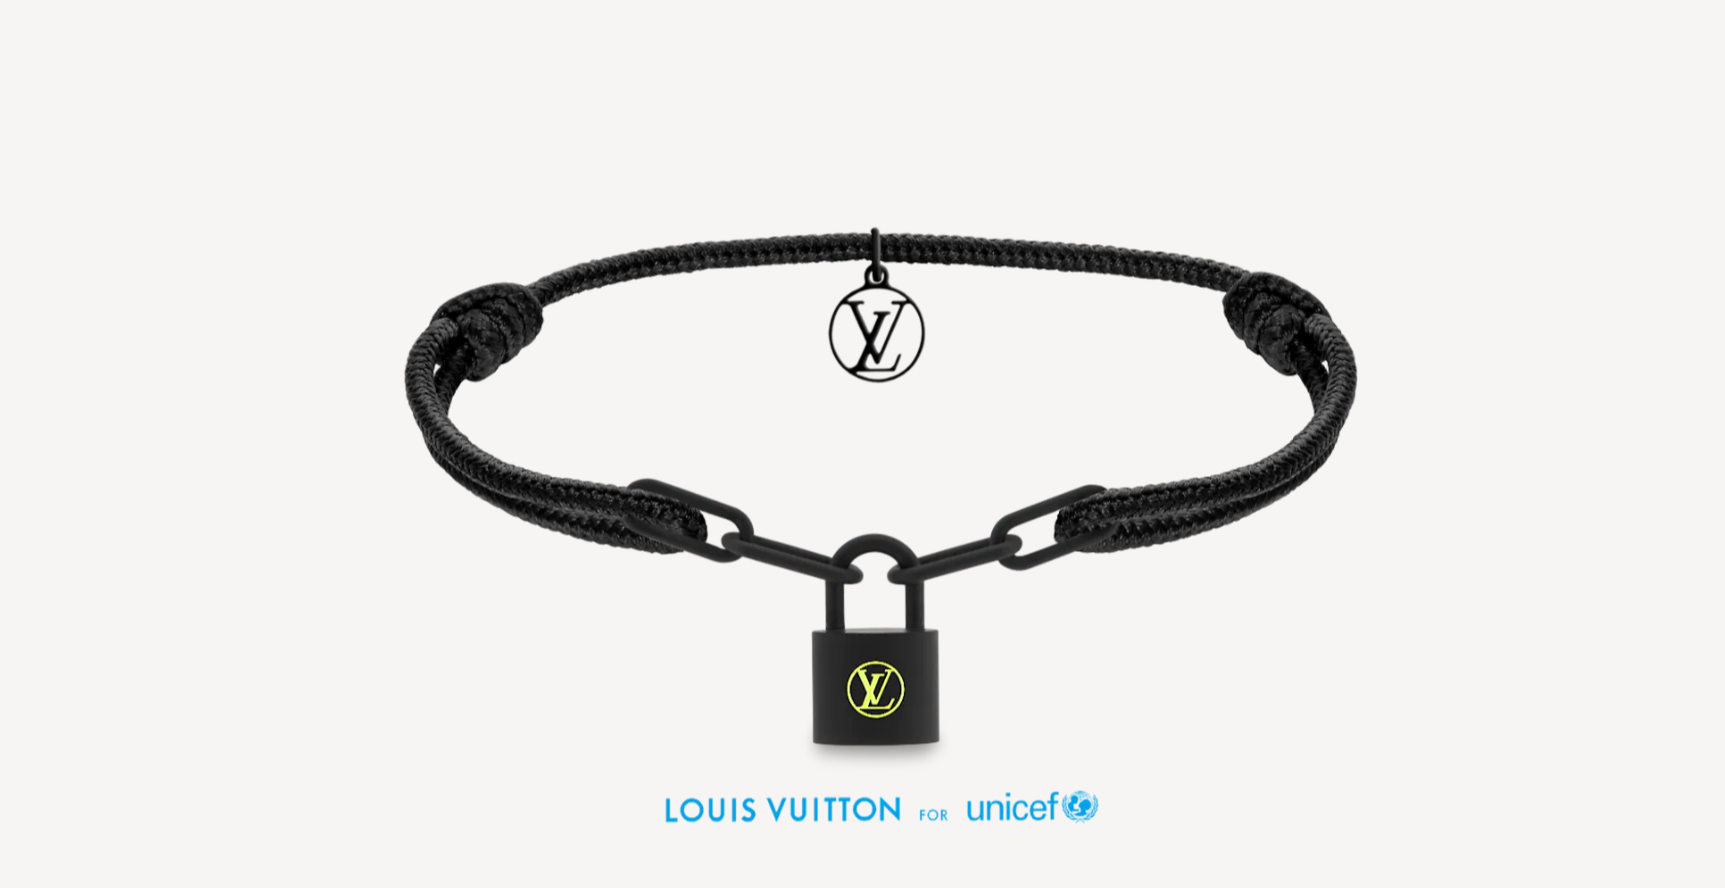 Louis Vuitton Benefits UNICEF With New Lockit Bracelets by Virgil Abloh   CR Fashion Book